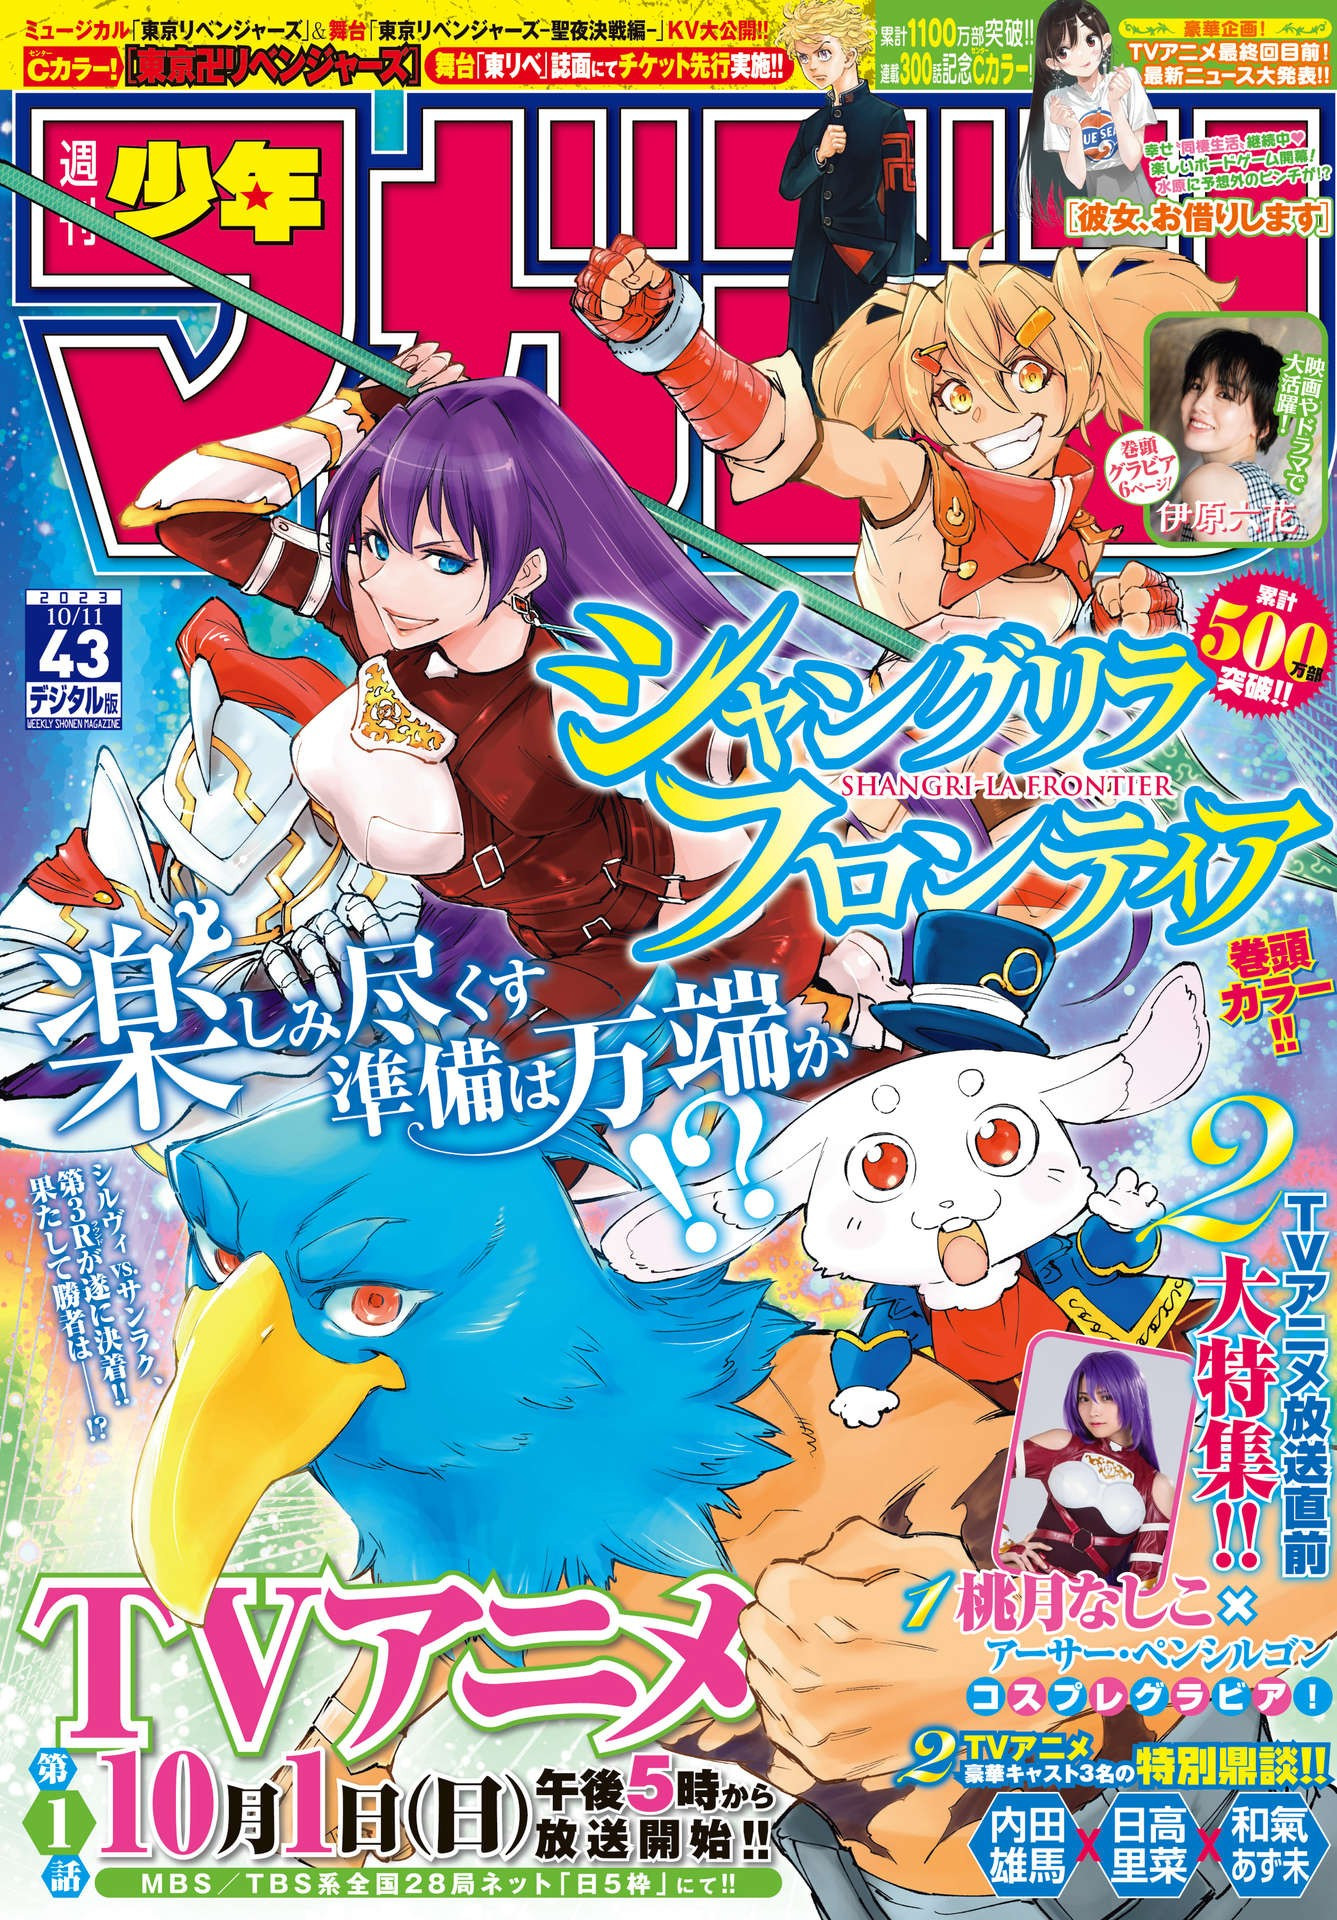 Weekly Shōnen Magazine - 週刊少年マガジン - Chapter 2023-43 - Page 1